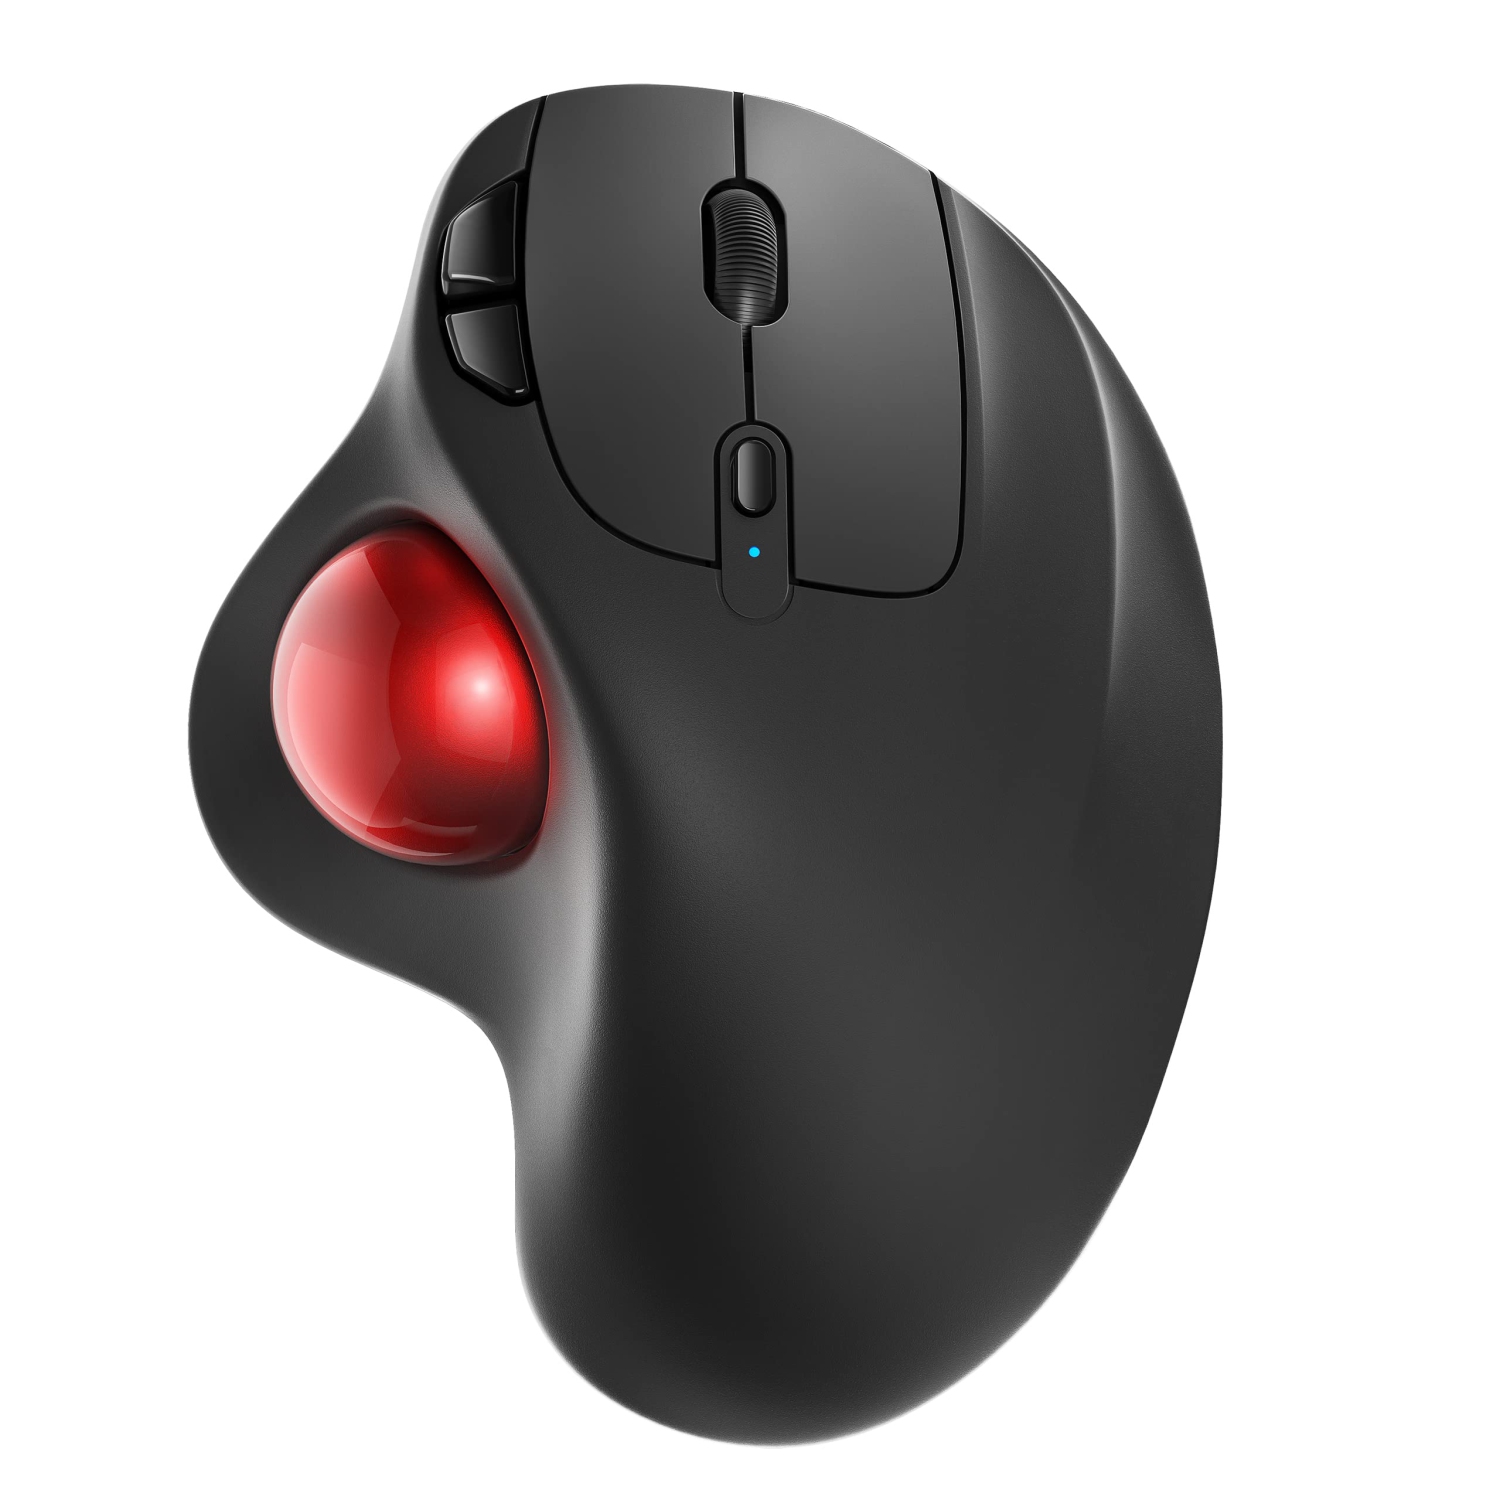 Wireless Trackball Mouse, Rechargeable Ergonomic Mouse, Easy Thumb Control, Precise & Smooth Tracking, 3 Device Connection (